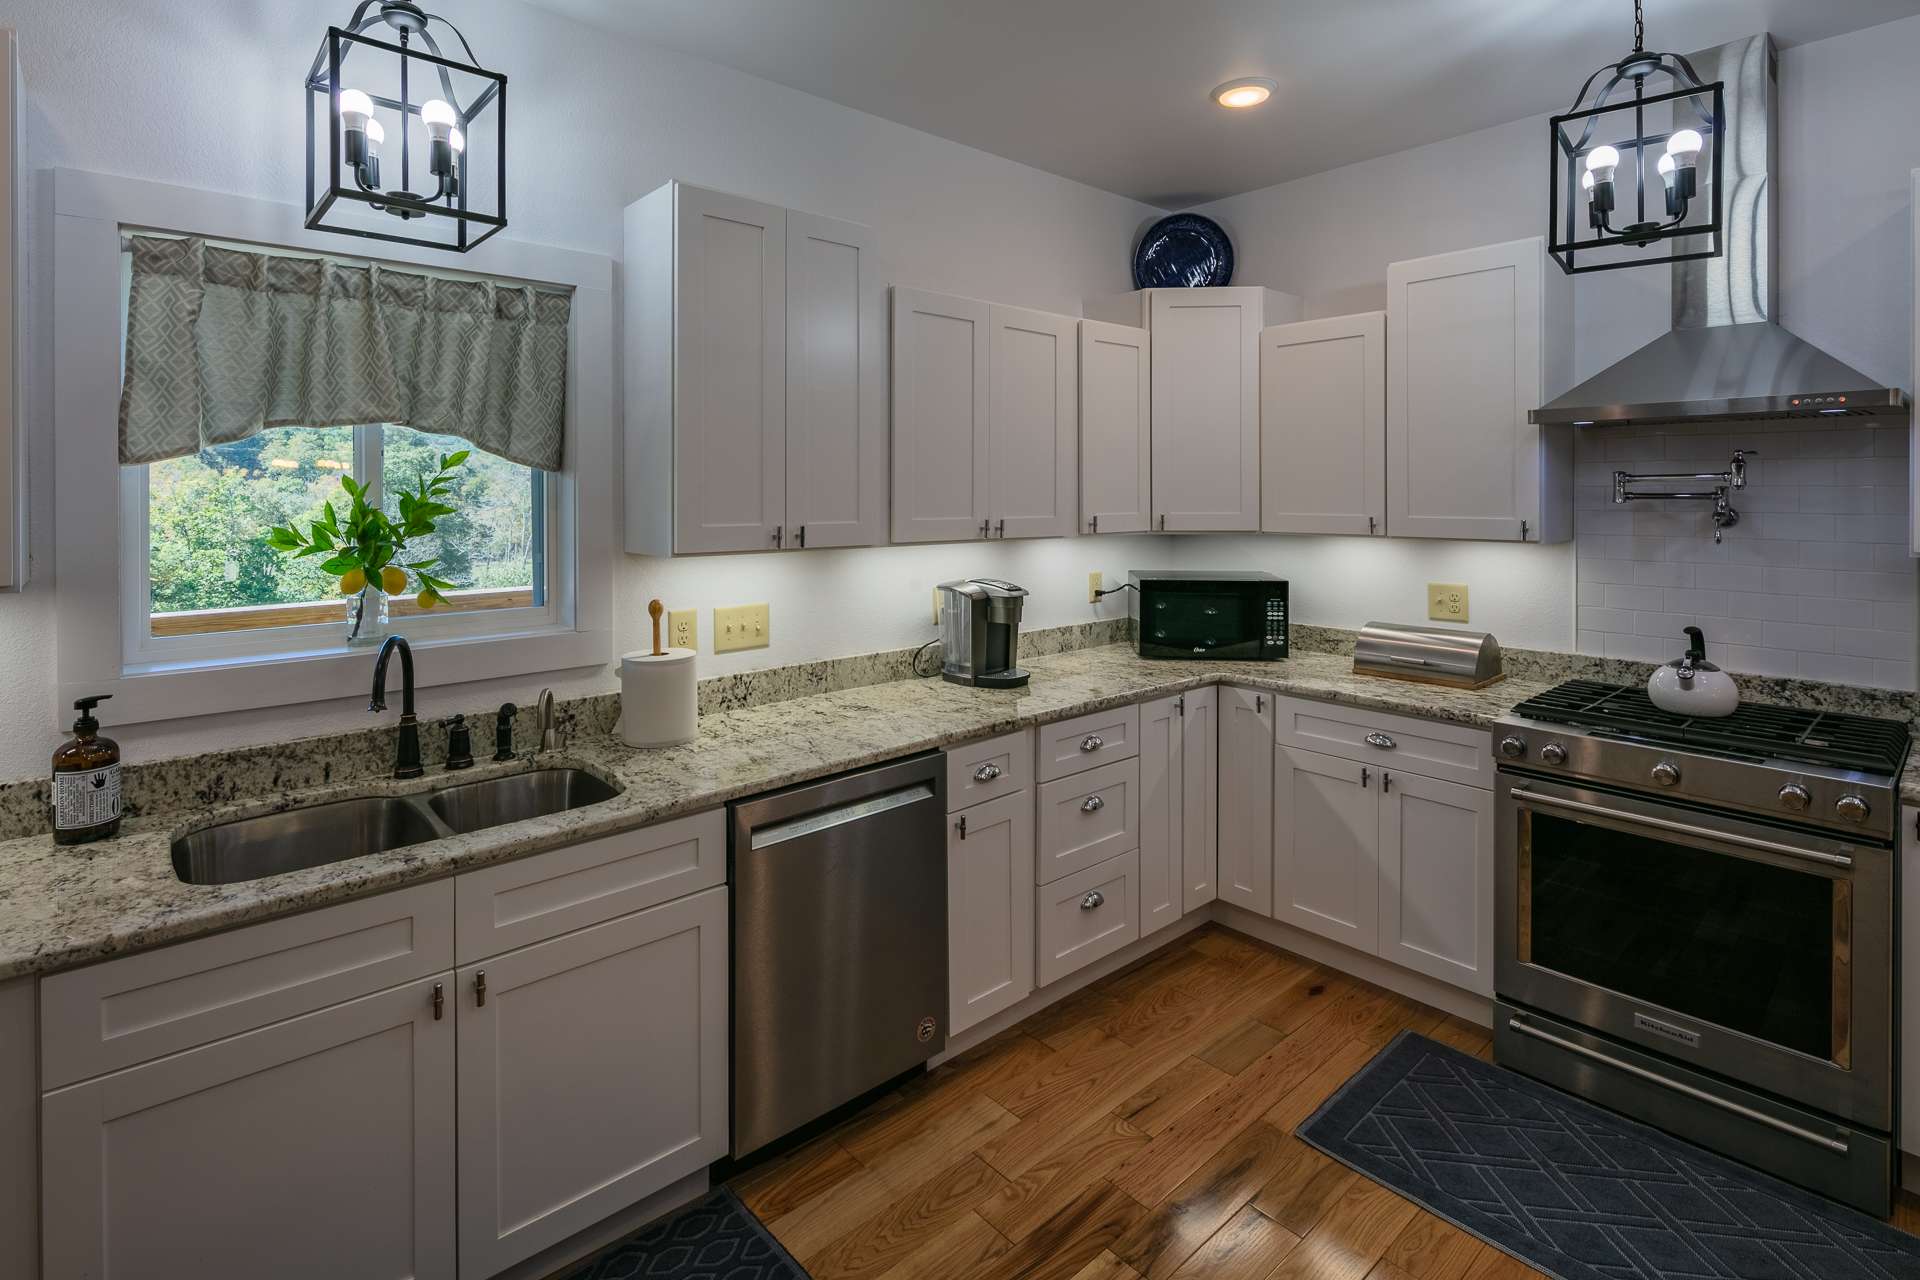 This designer kitchen featuring stainless appliances, including a gas range with pot filler, is perfect for the creative gourmet.